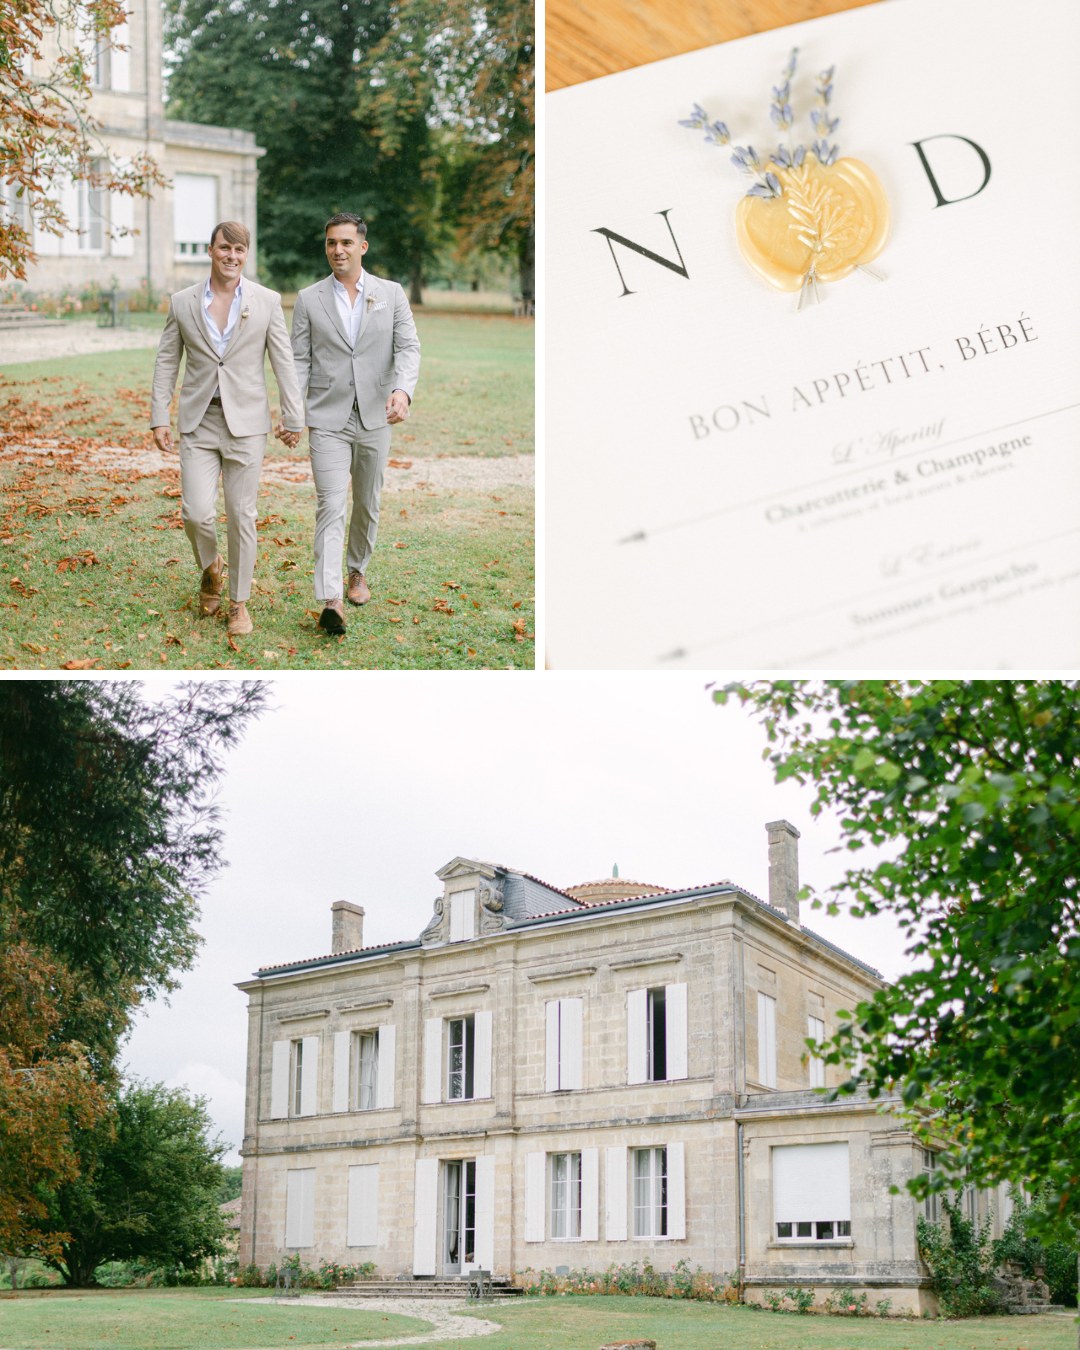 A collage with three images: two men in light gray suits walk in a grassy garden surrounded by trees; a close-up of a menu with gold wax seal, lavender sprigs, and elegant text; and a large, two-story stone building with tall windows.